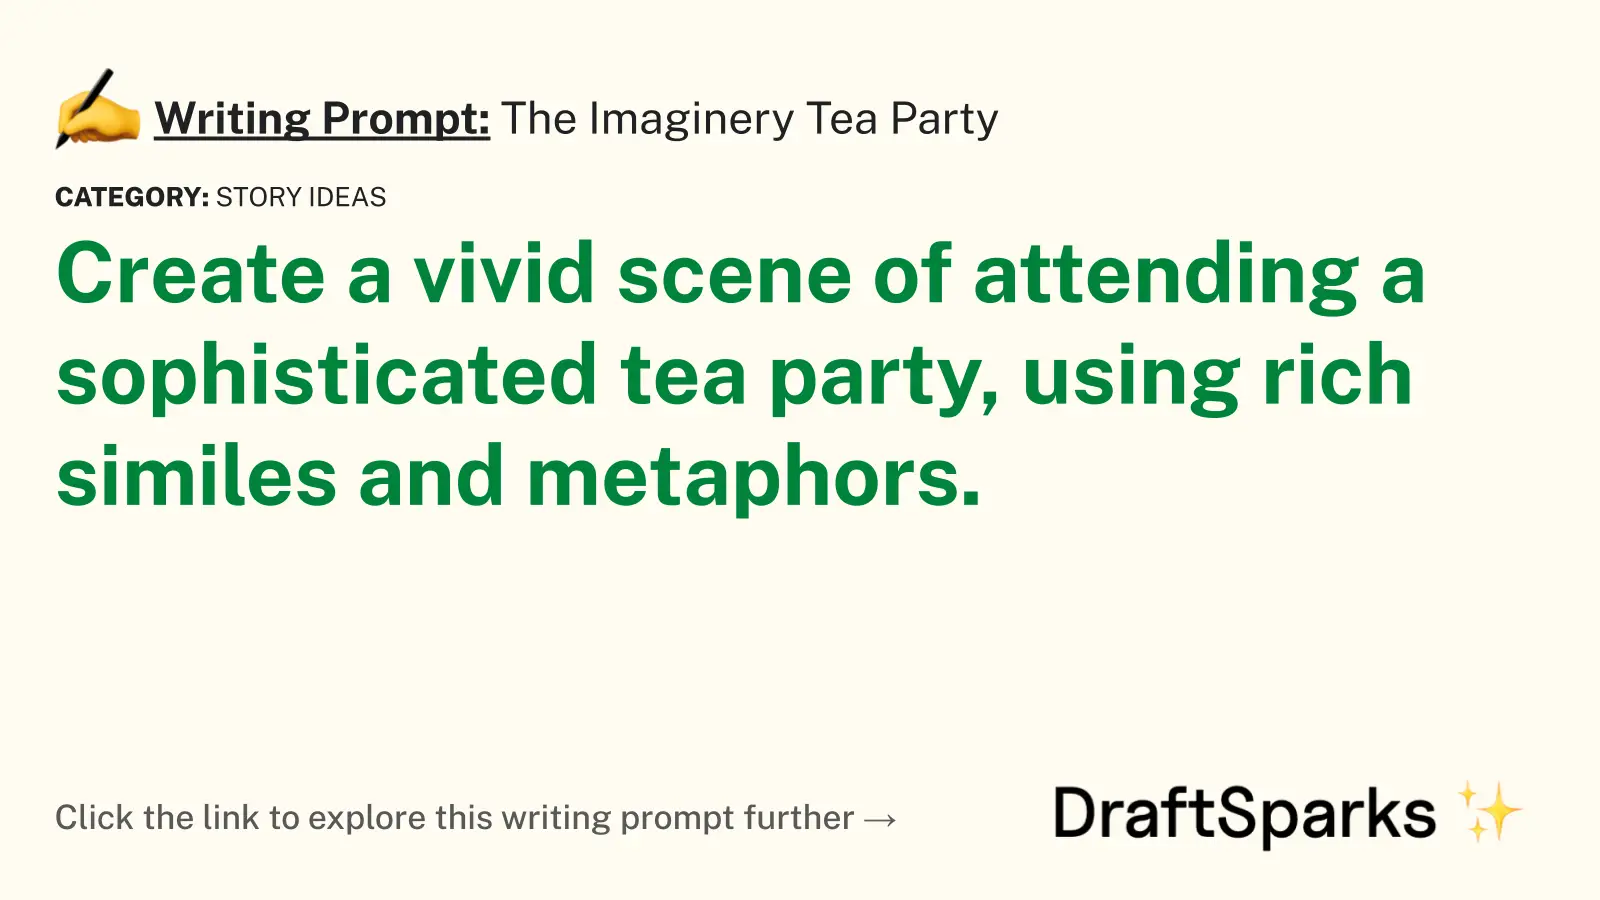 The Imaginery Tea Party